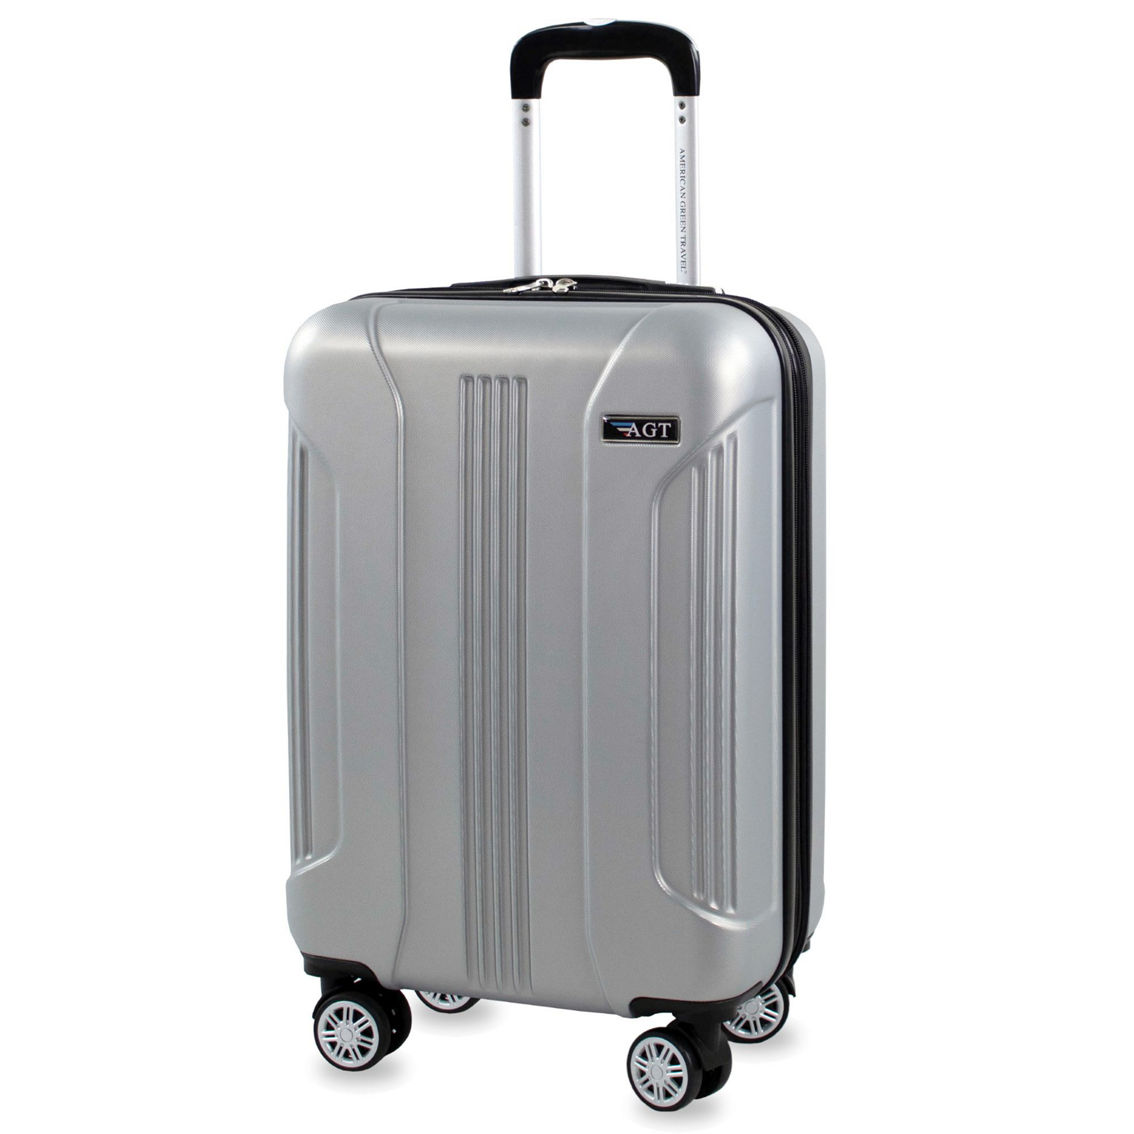 American Green Travel Denali 20inch Expandable Carry On Luggage ...